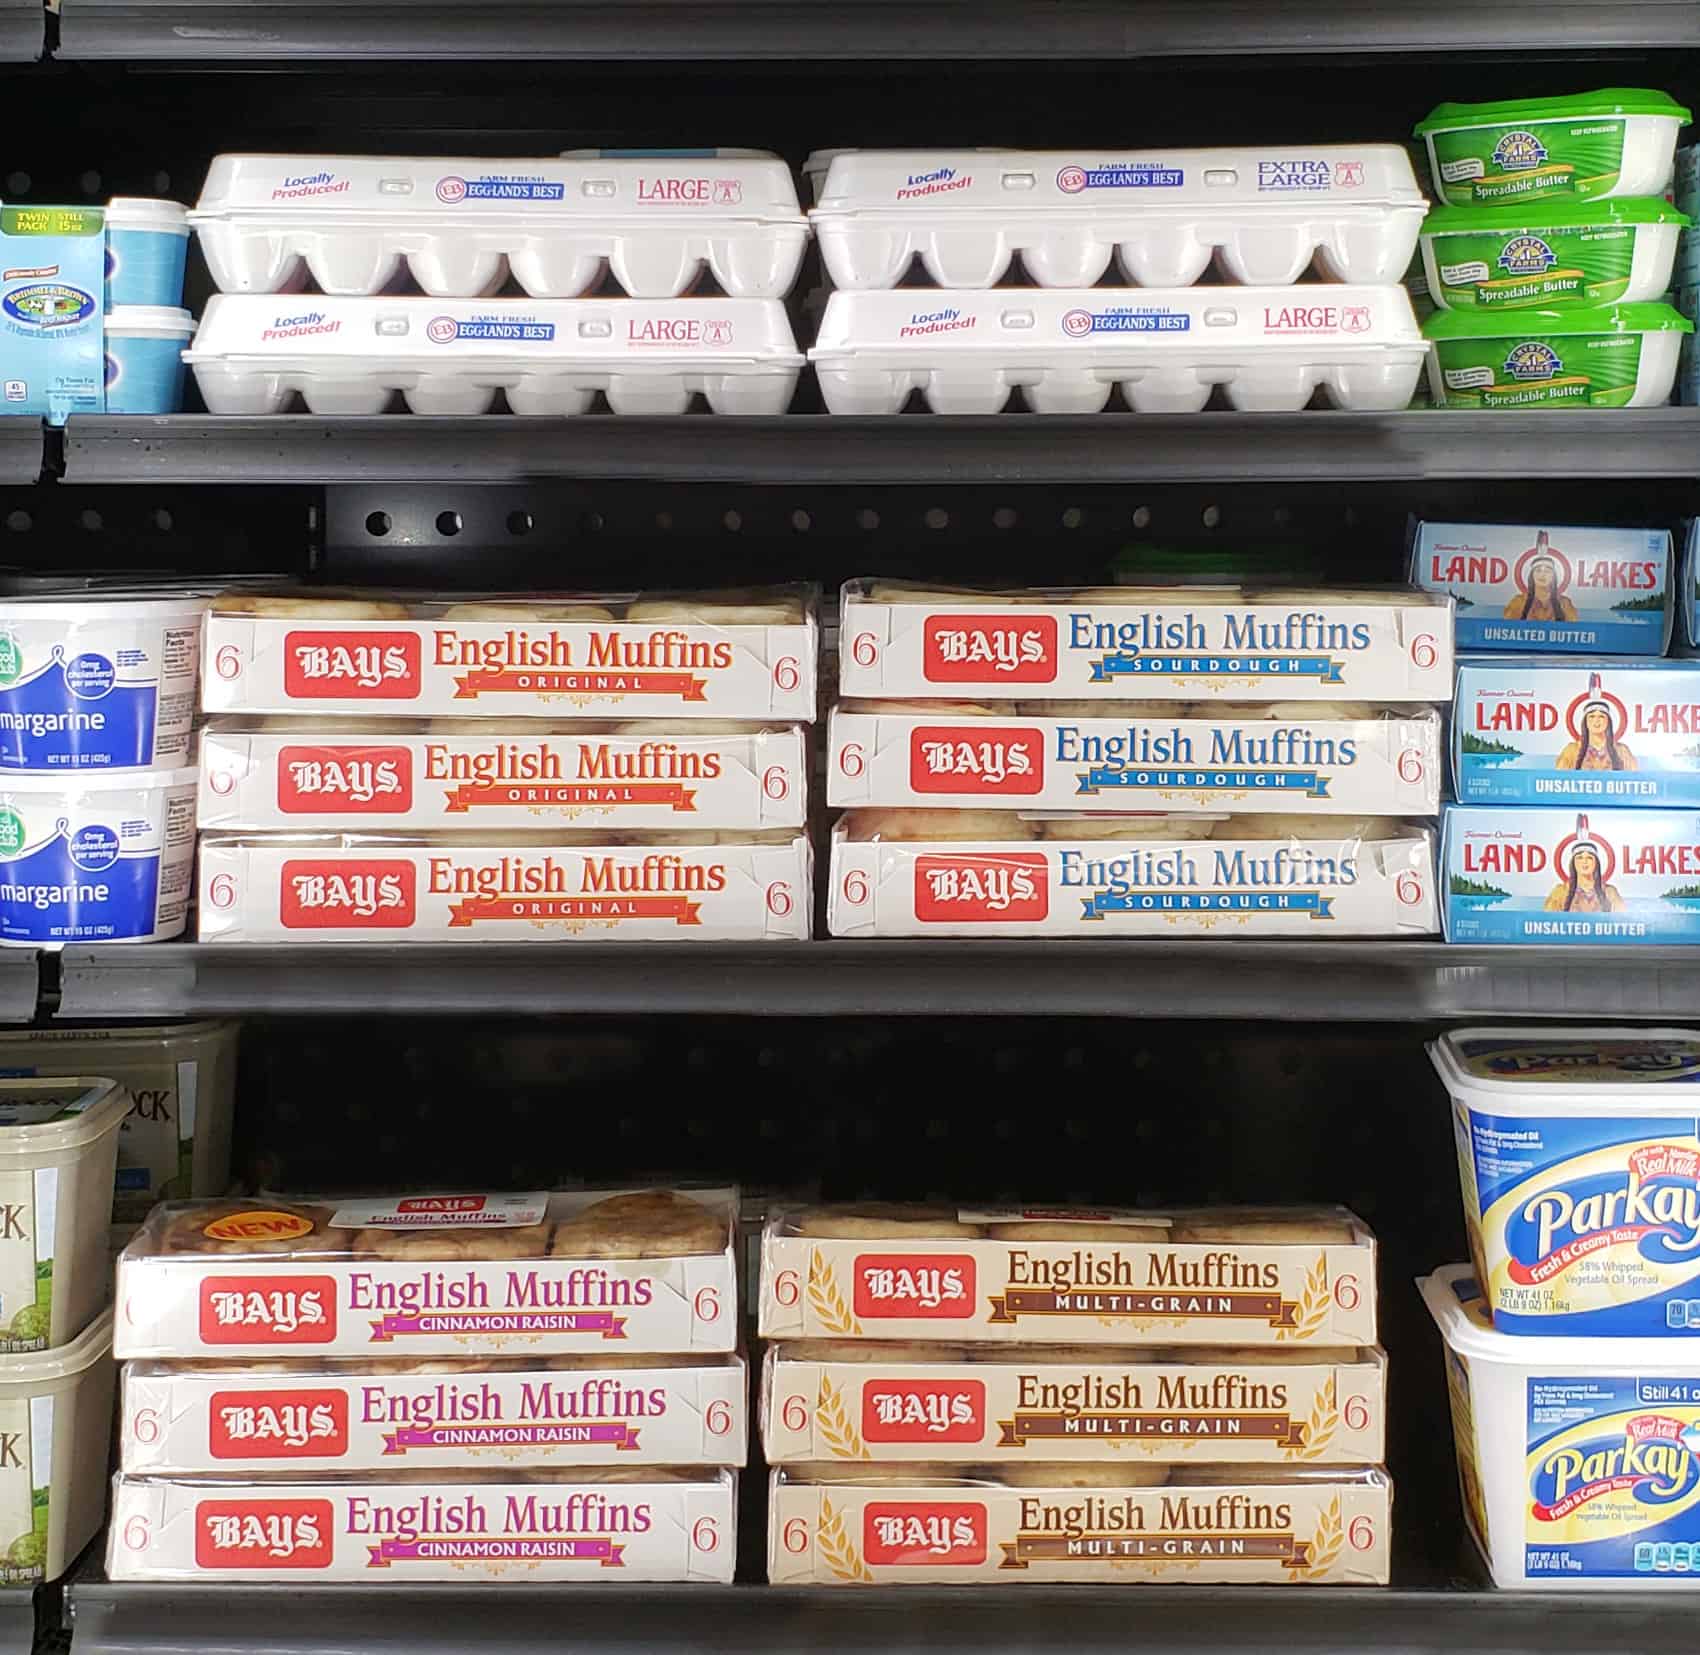 Bays English Muffins at the Grocery Store on a refrigerated shelf.